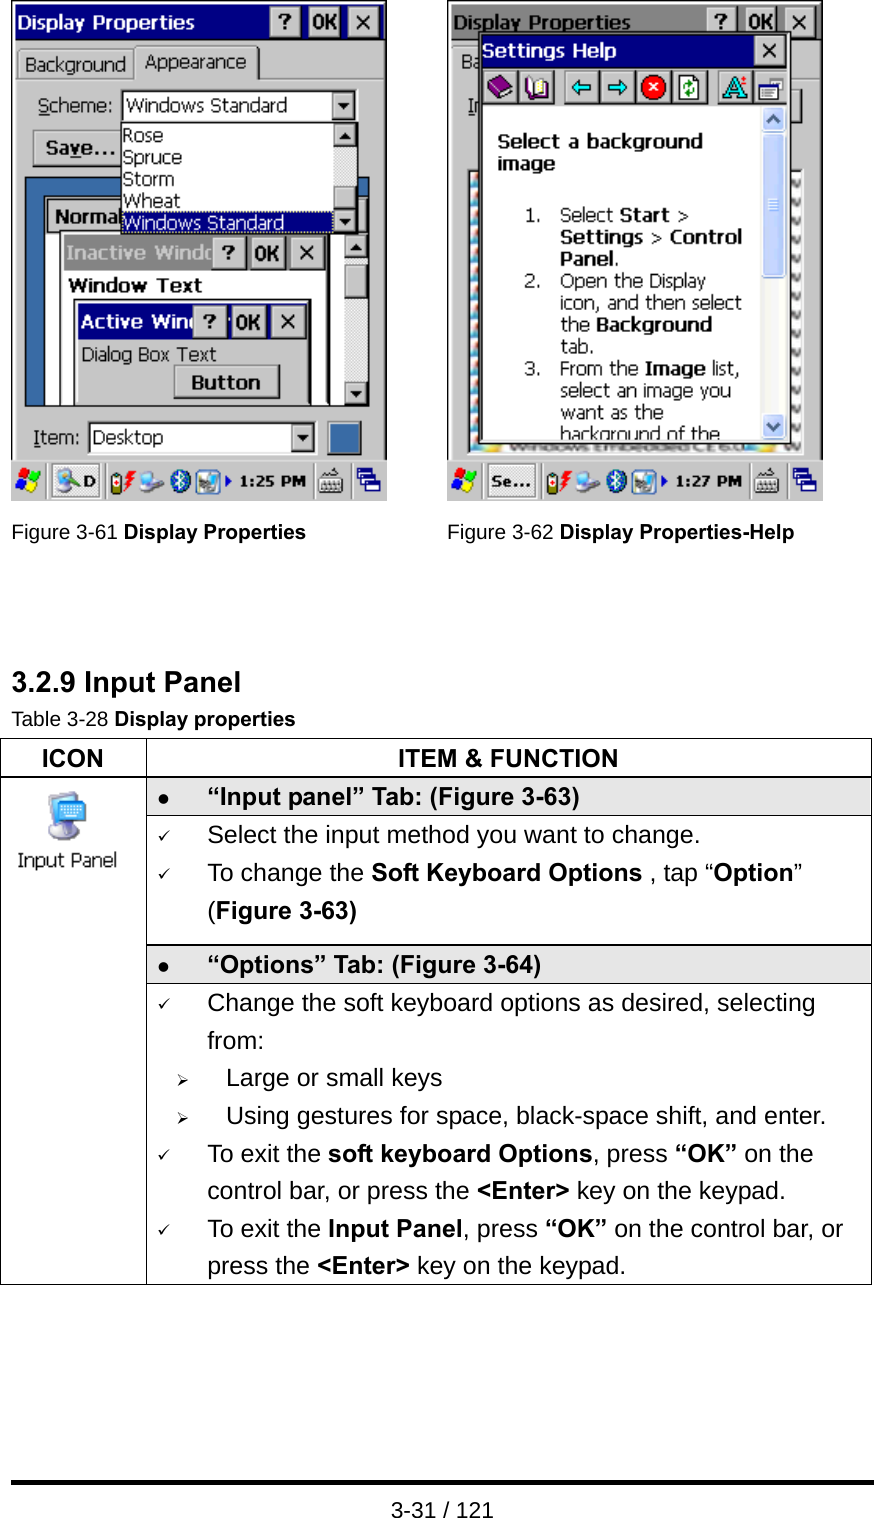  3-31 / 121    Figure 3-61 Display Properties Figure 3-62 Display Properties-Help    3.2.9 Input Panel Table 3-28 Display properties ICON  ITEM &amp; FUNCTION z “Input panel” Tab: (Figure 3-63) 9 Select the input method you want to change. 9 To change the Soft Keyboard Options , tap “Option” (Figure 3-63) z “Options” Tab: (Figure 3-64)  9 Change the soft keyboard options as desired, selecting from: ¾ Large or small keys ¾ Using gestures for space, black-space shift, and enter. 9 To exit the soft keyboard Options, press “OK” on the control bar, or press the &lt;Enter&gt; key on the keypad. 9 To exit the Input Panel, press “OK” on the control bar, or press the &lt;Enter&gt; key on the keypad.    